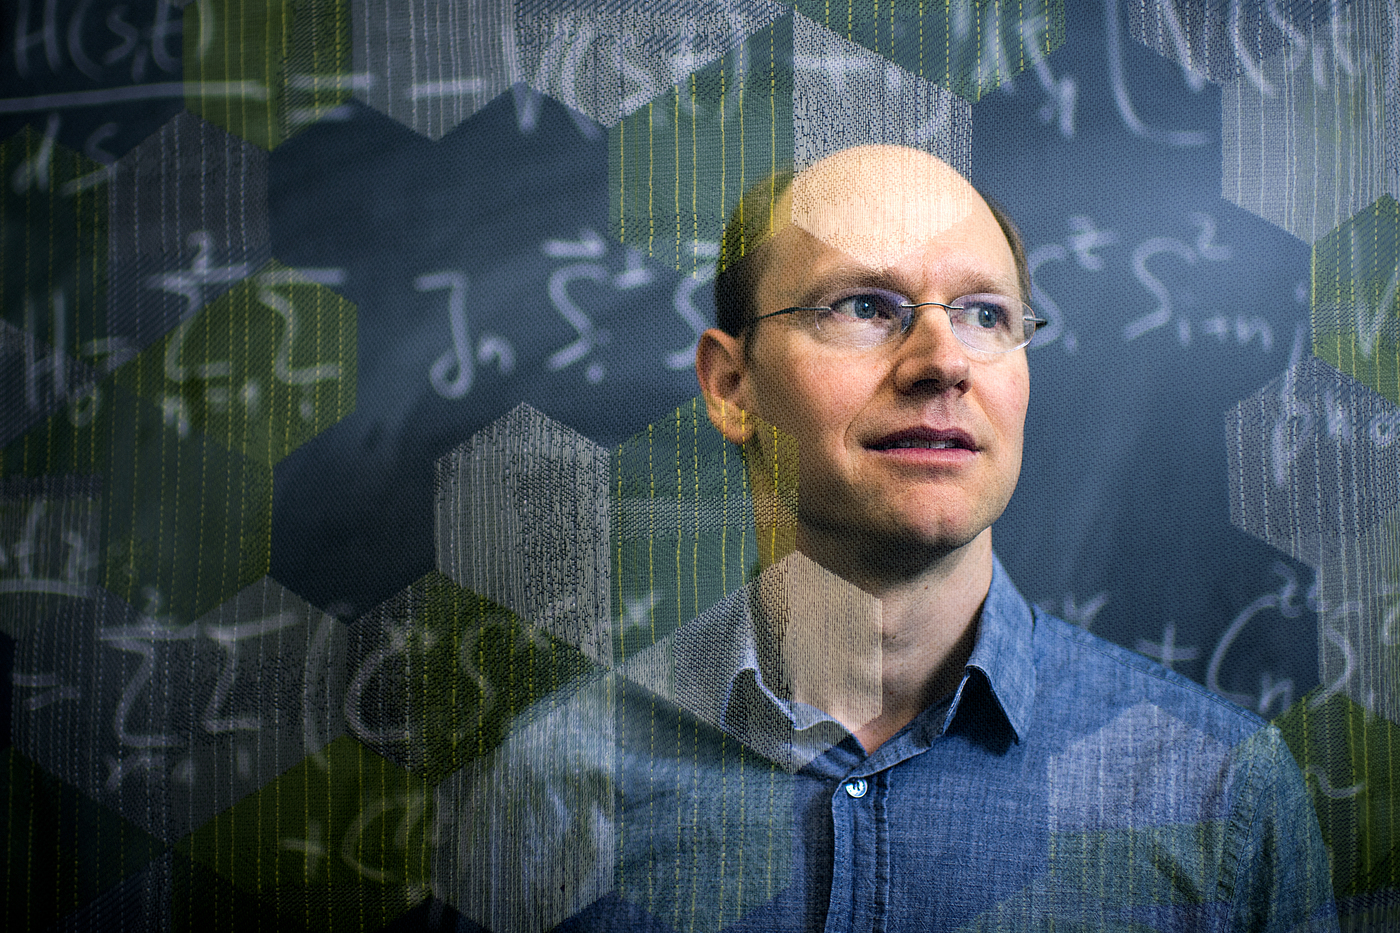 Headshot of Gregory Fiete, overlaid by equations and hexagons